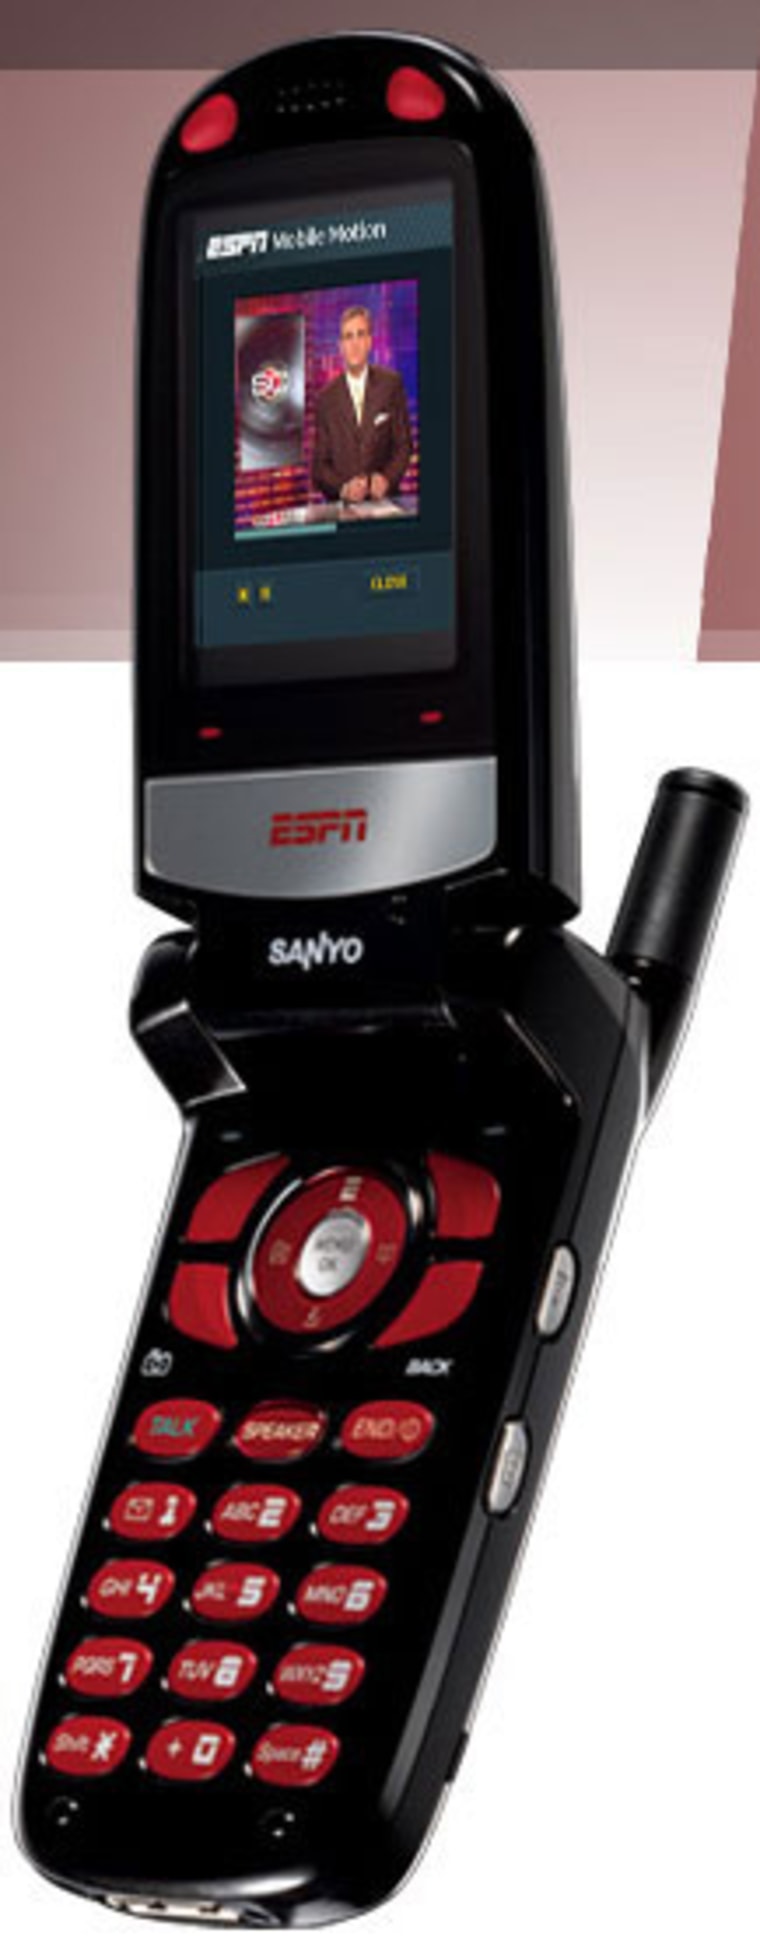 The first cell phone for sports fanatics